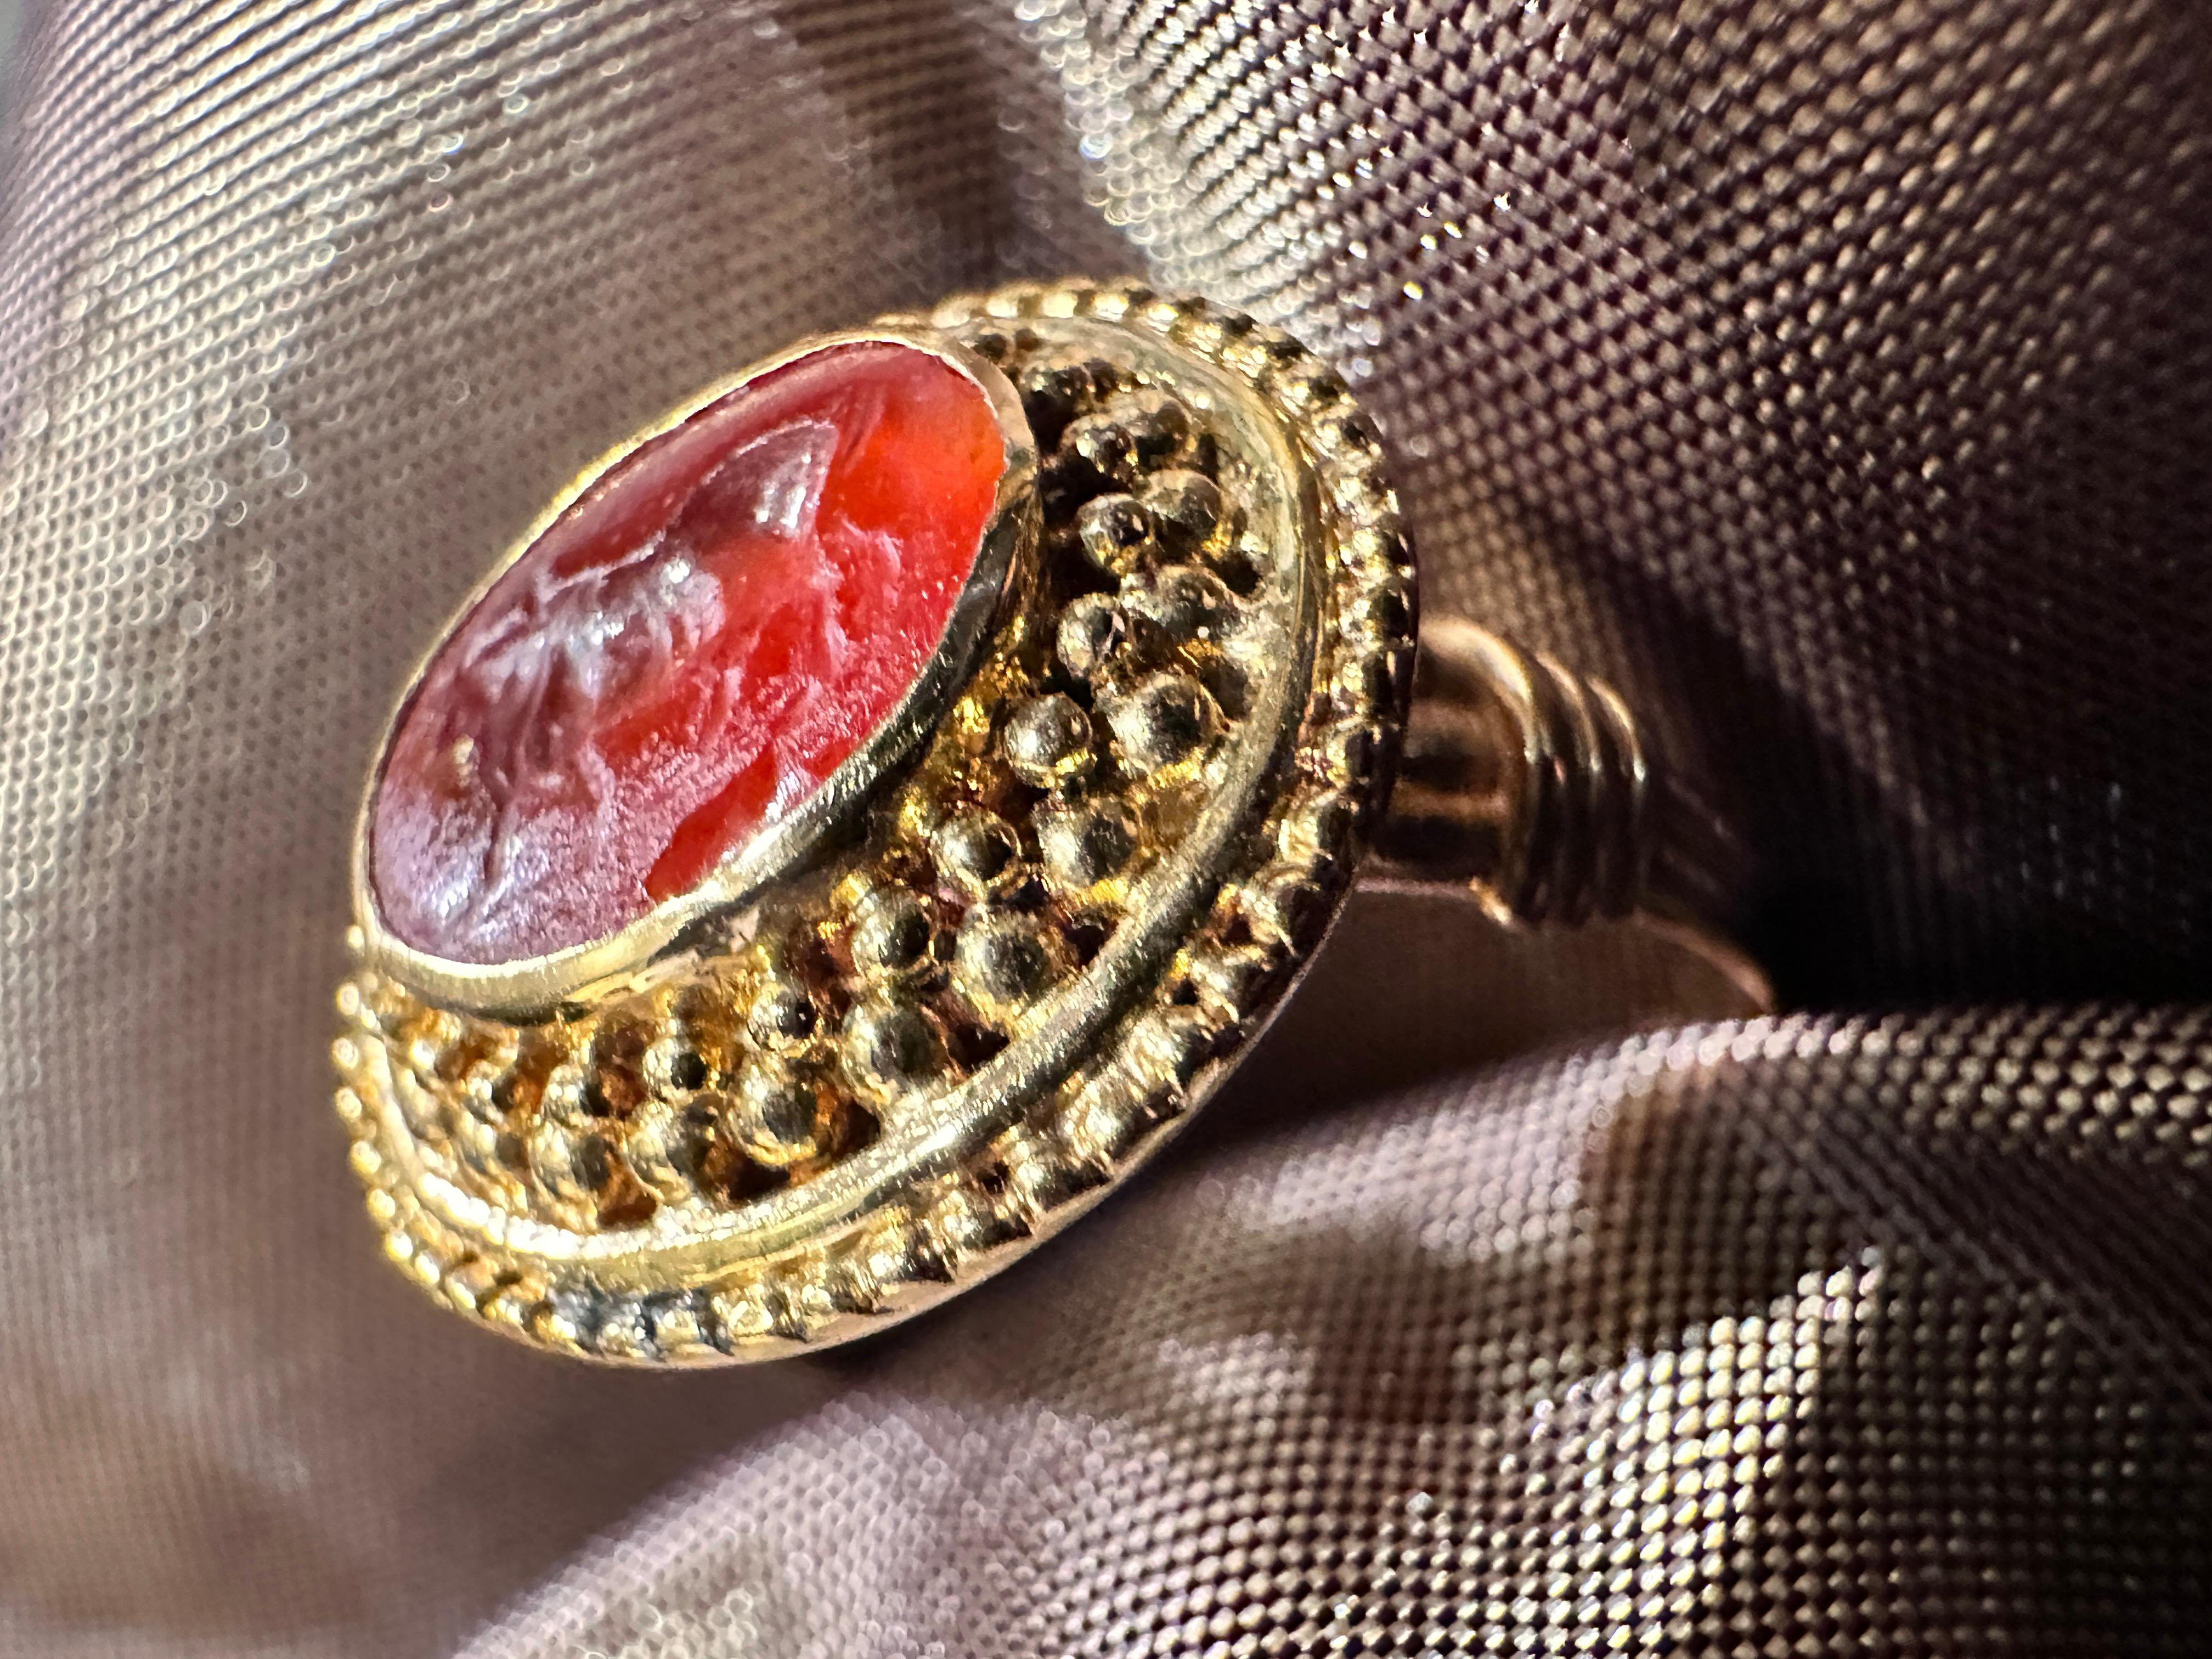 18K Gold Roman Intaglio Ring with Bull Signet In Fair Condition For Sale In London, GB